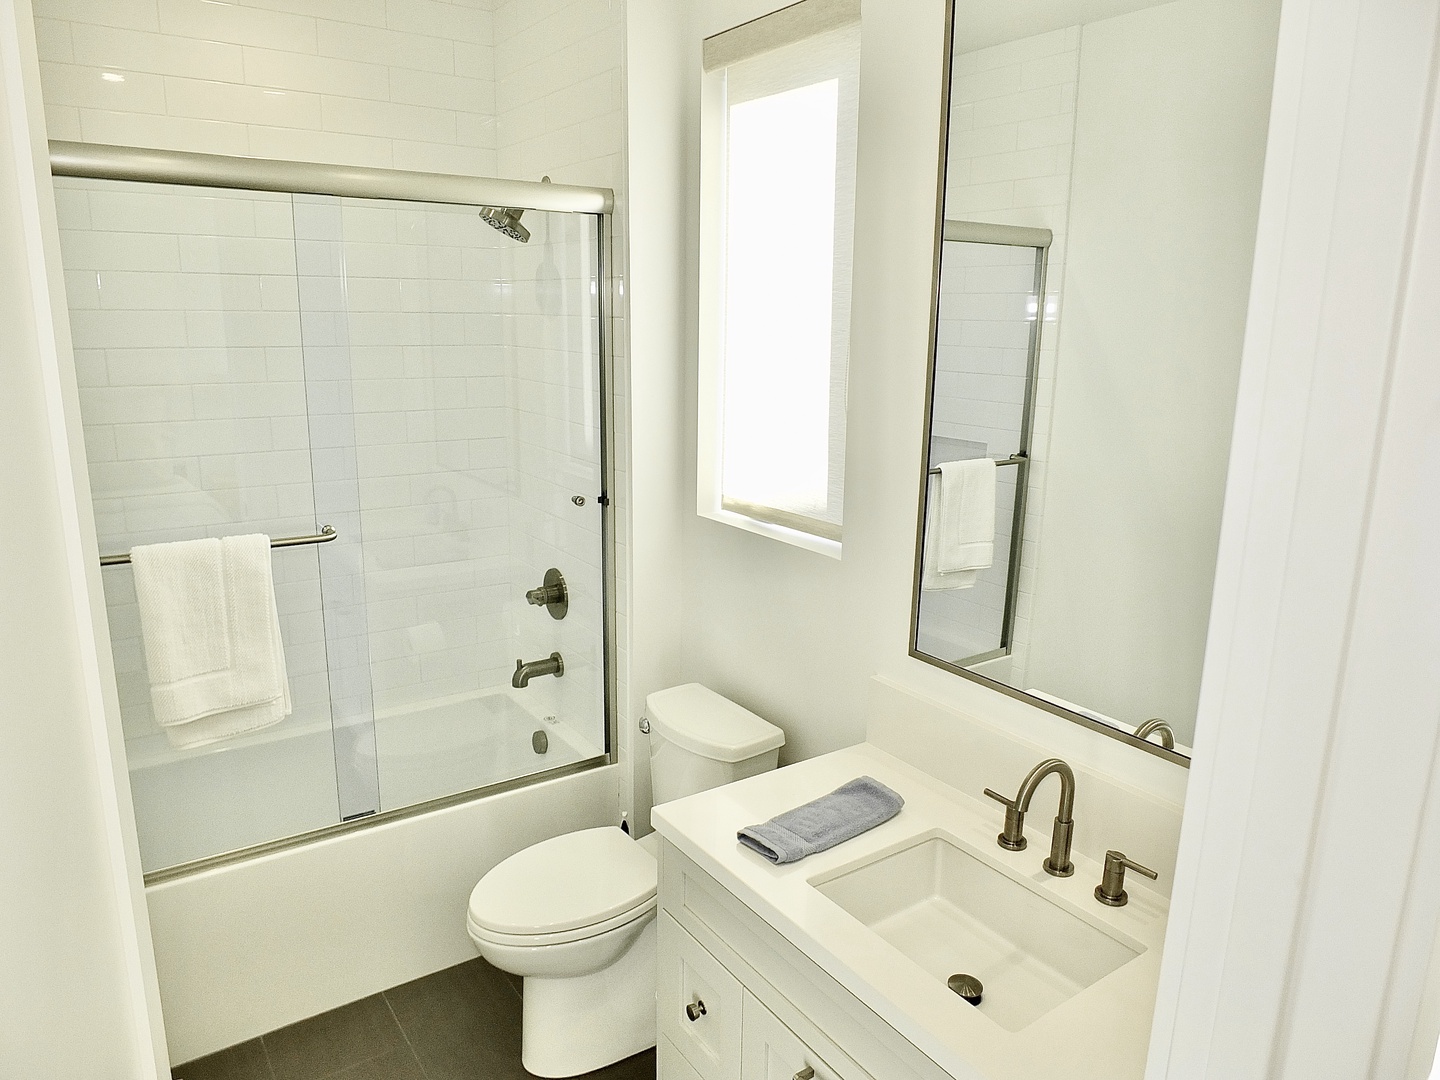 A single vanity & shower/tub combo await in this ensuite bath